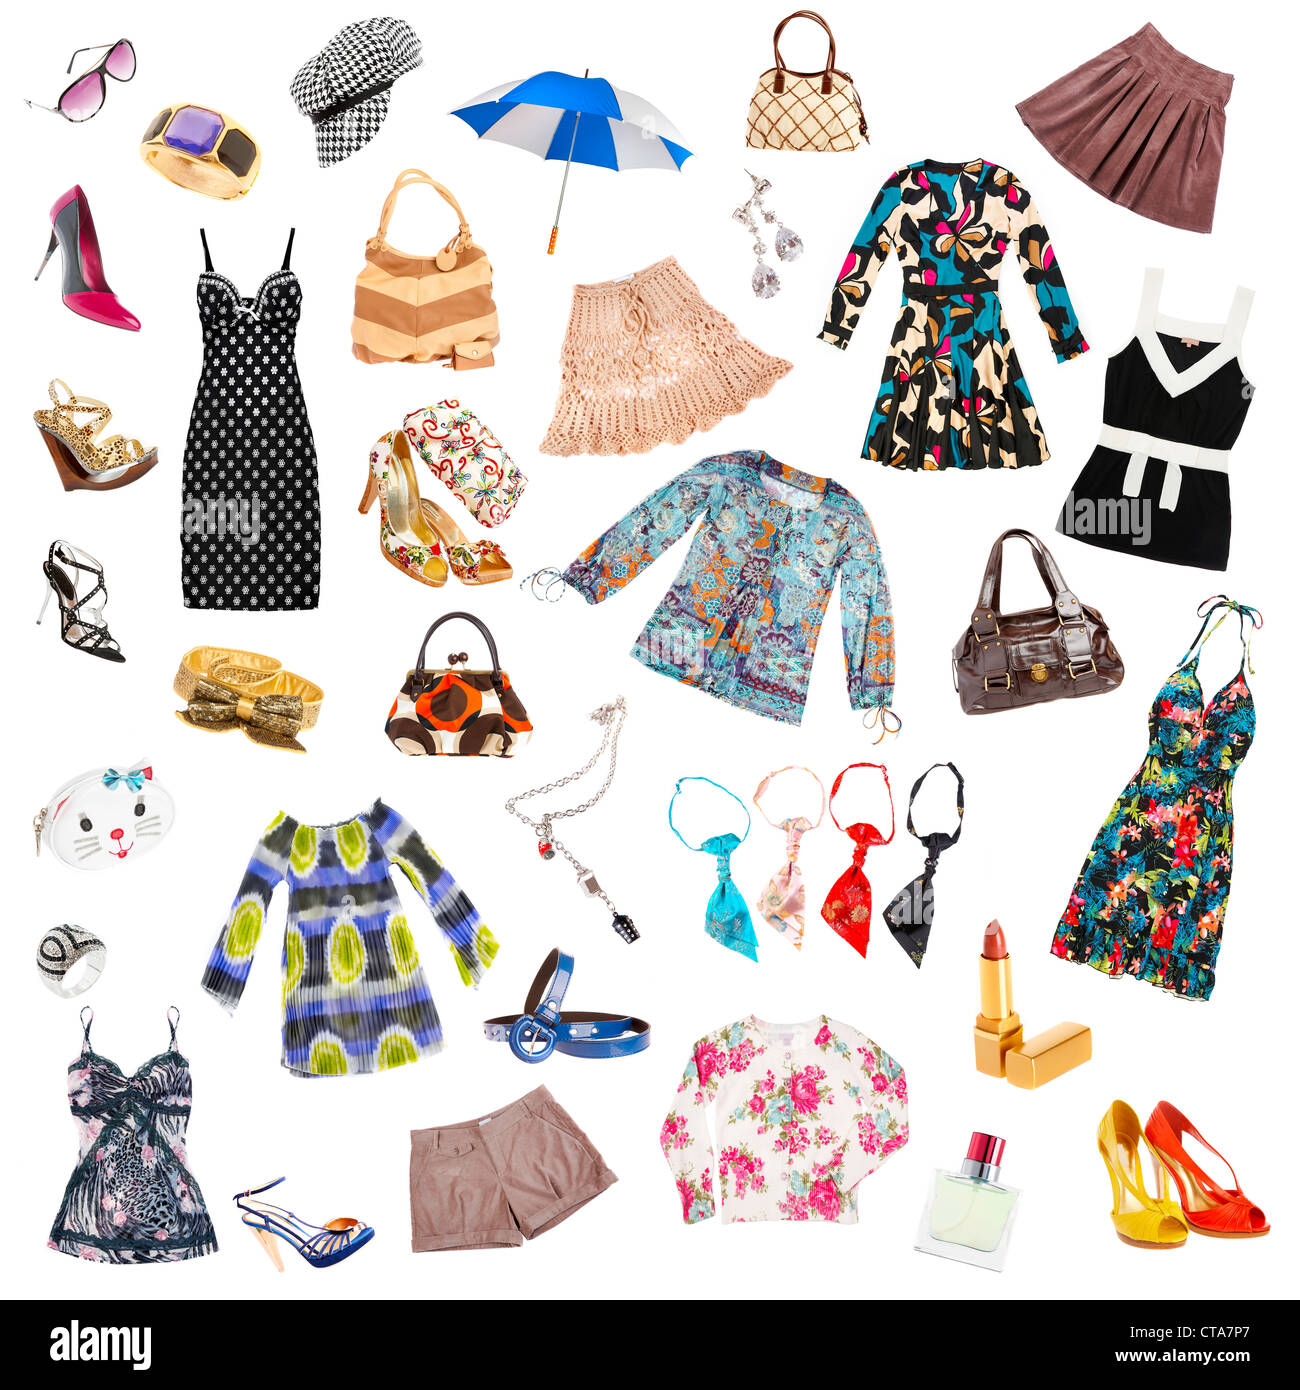 Lady's clothes and accessories on a white background Stock Photo